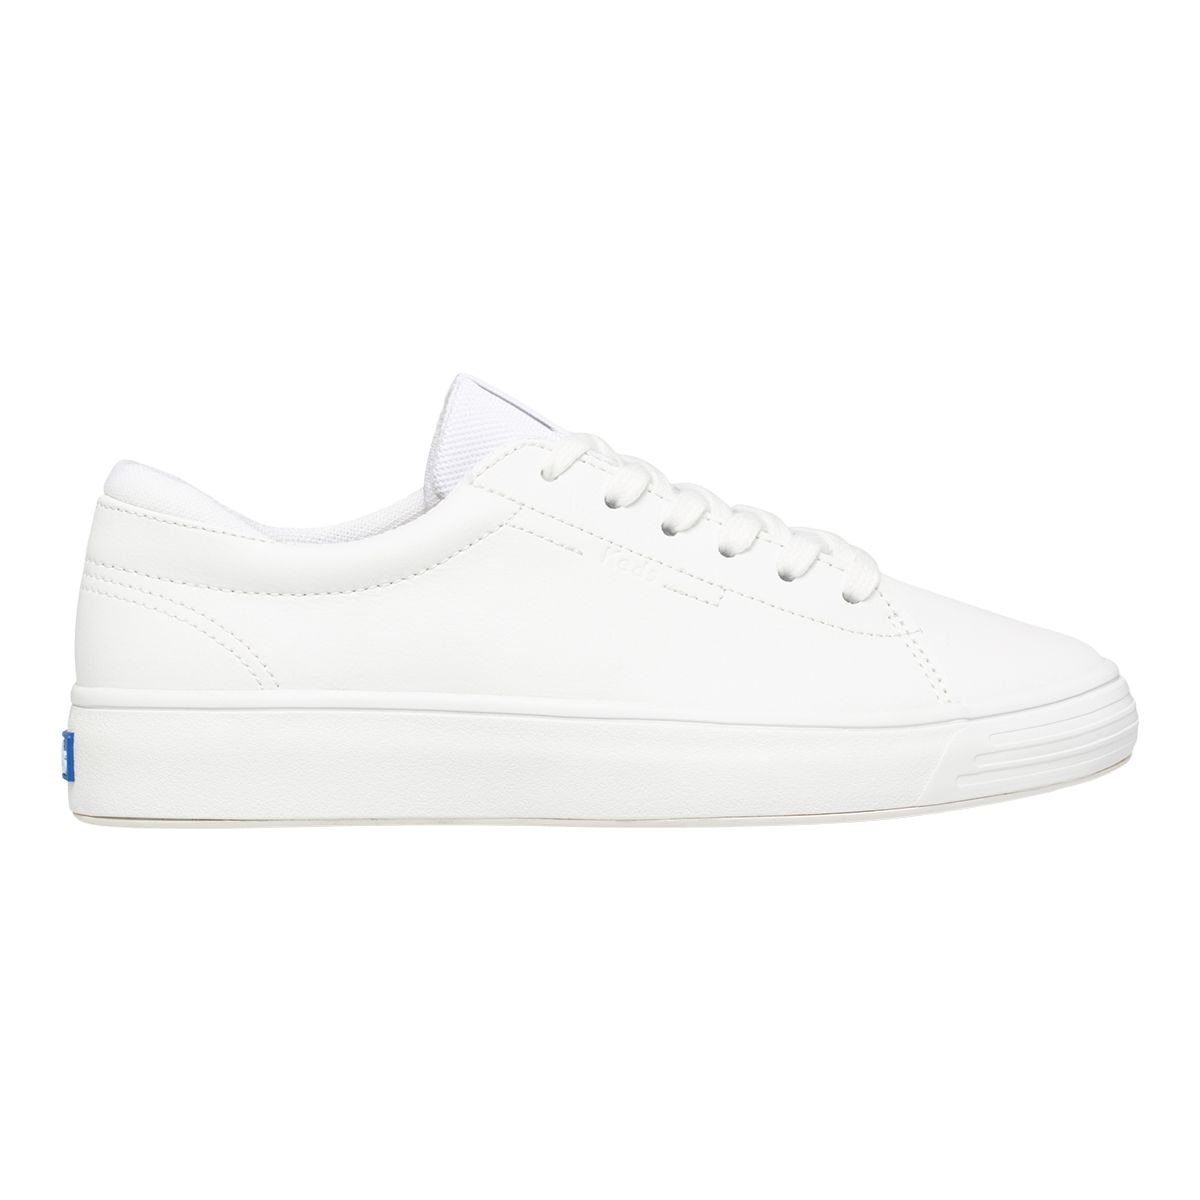 Keds Women's Alley Leather Shoes | SportChek